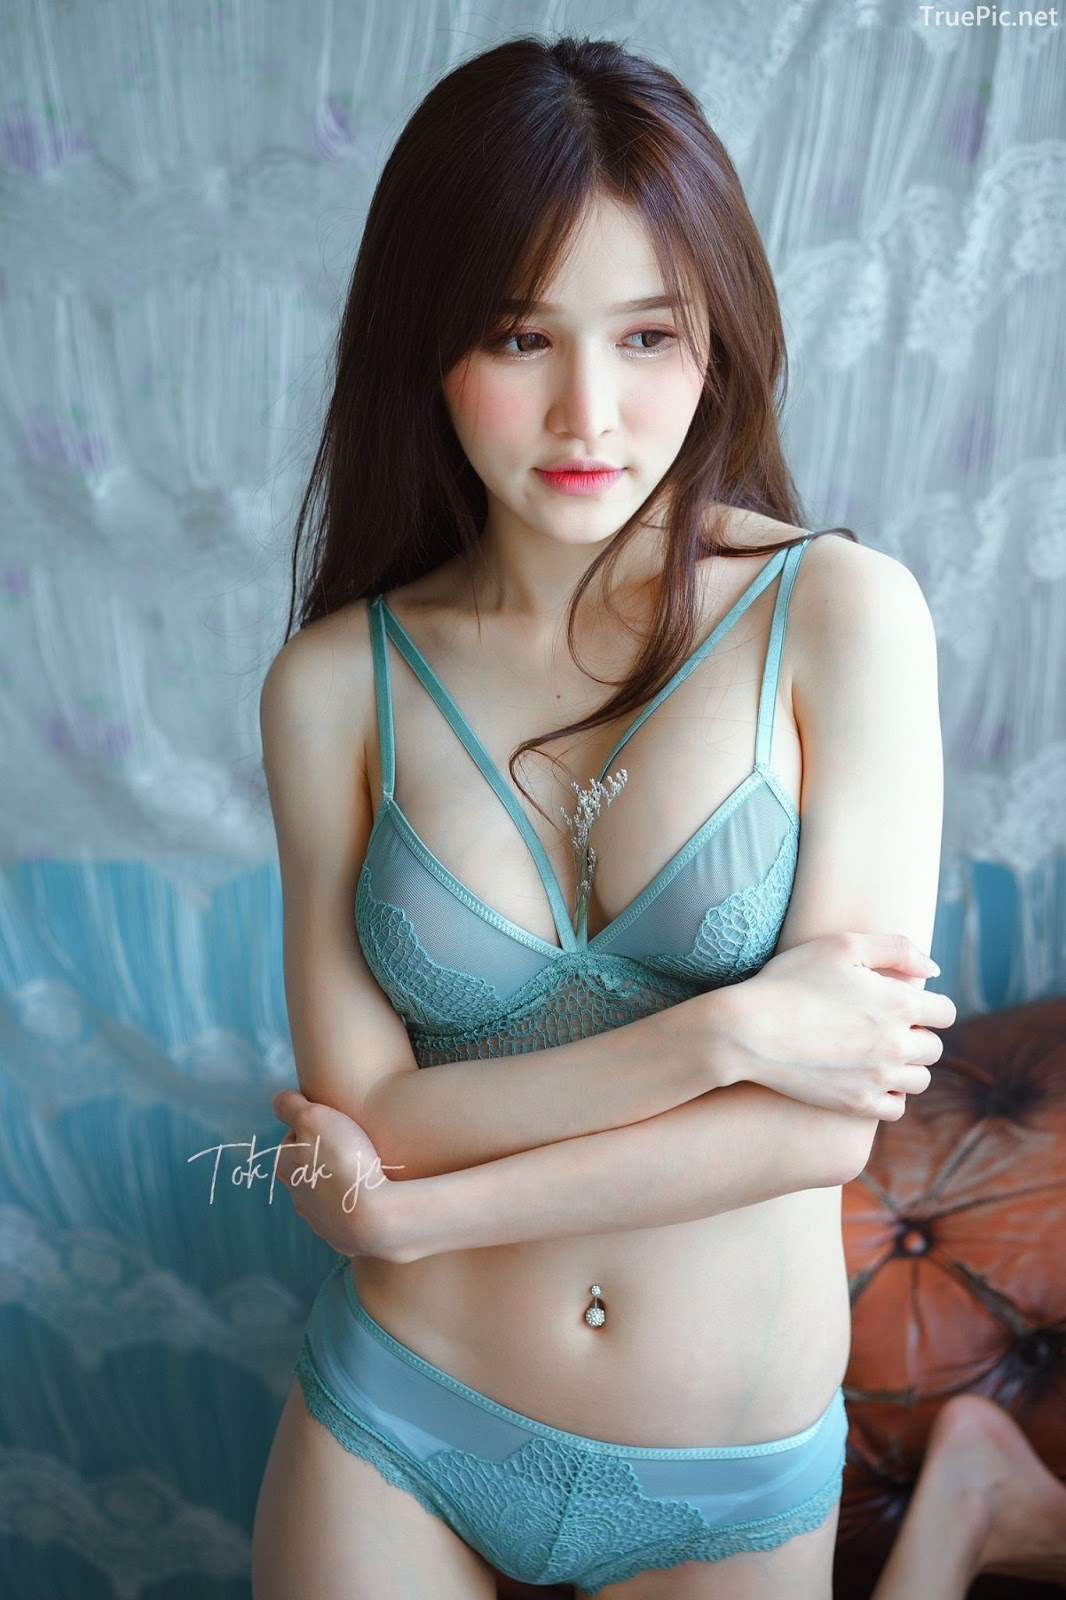 Thailand sexy model - Patcharaporn Chaopitakwong - The Blue Lingerie - TruePic.net - Picture 16